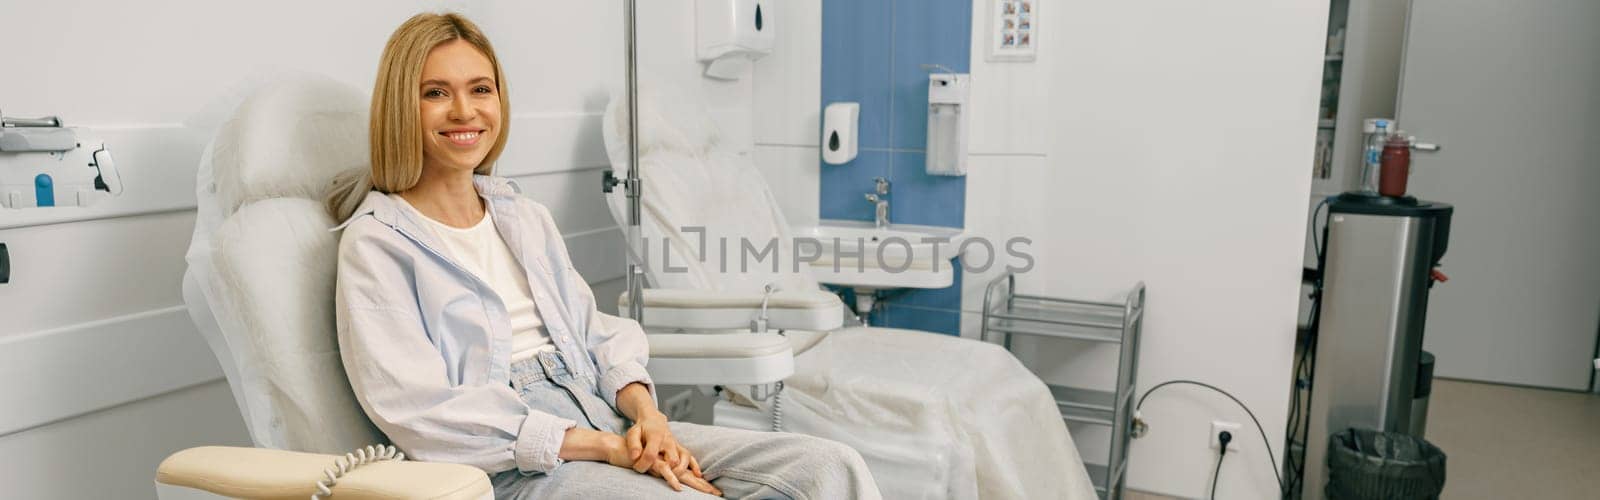 Smiling woman sitting in armchair while waiting for IV infusion during treatment in hospital by Yaroslav_astakhov